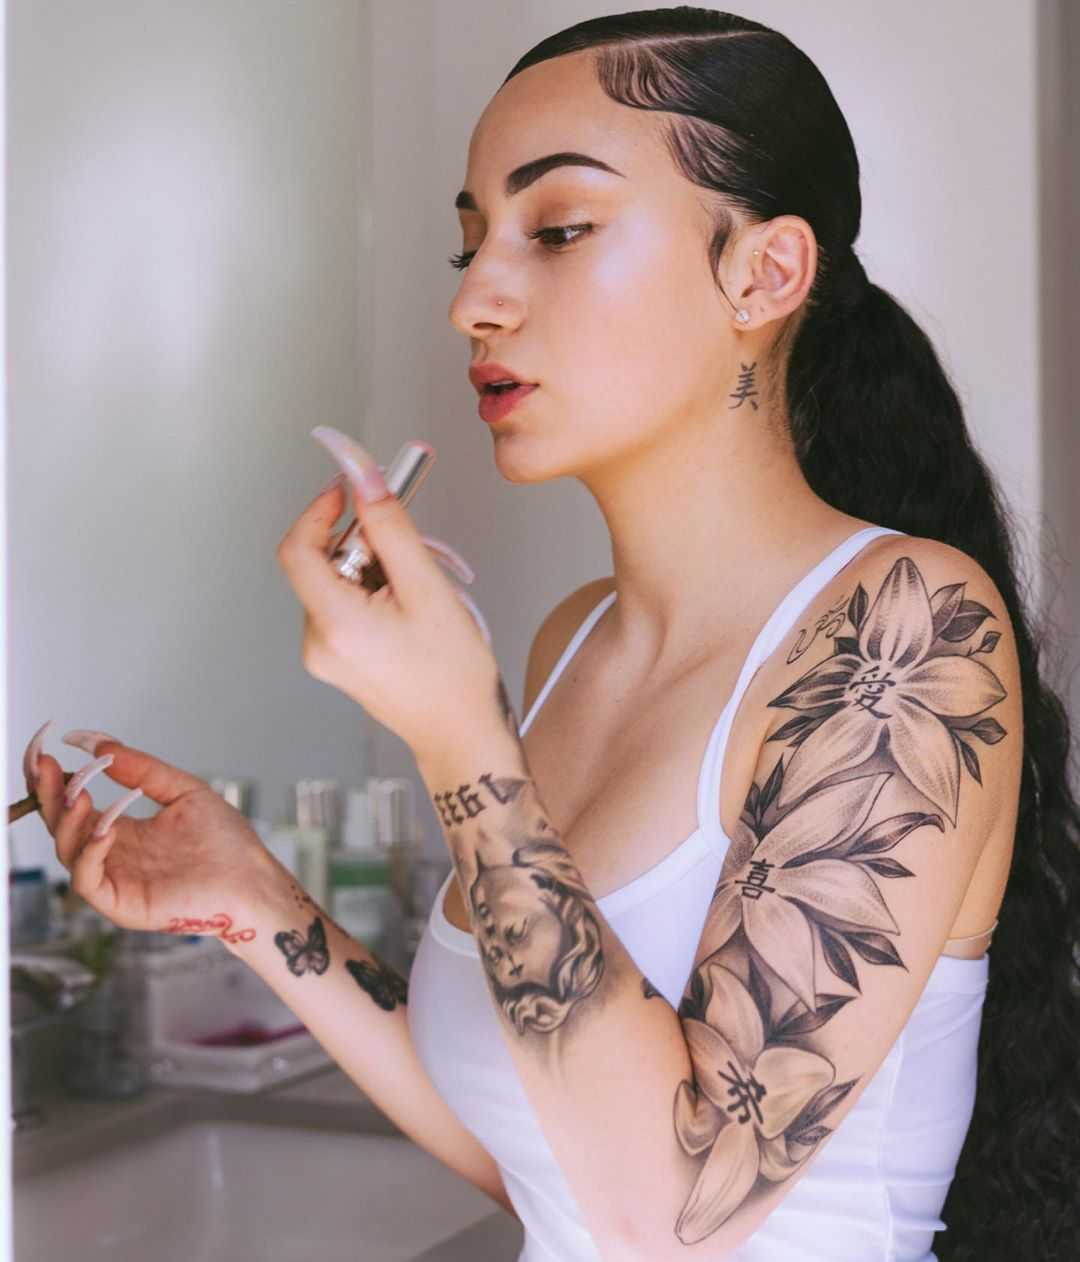 70+ Hot Pictures Of Danielle Bregoli aka Bhad Bhabie Which Will Win Your Heart 5